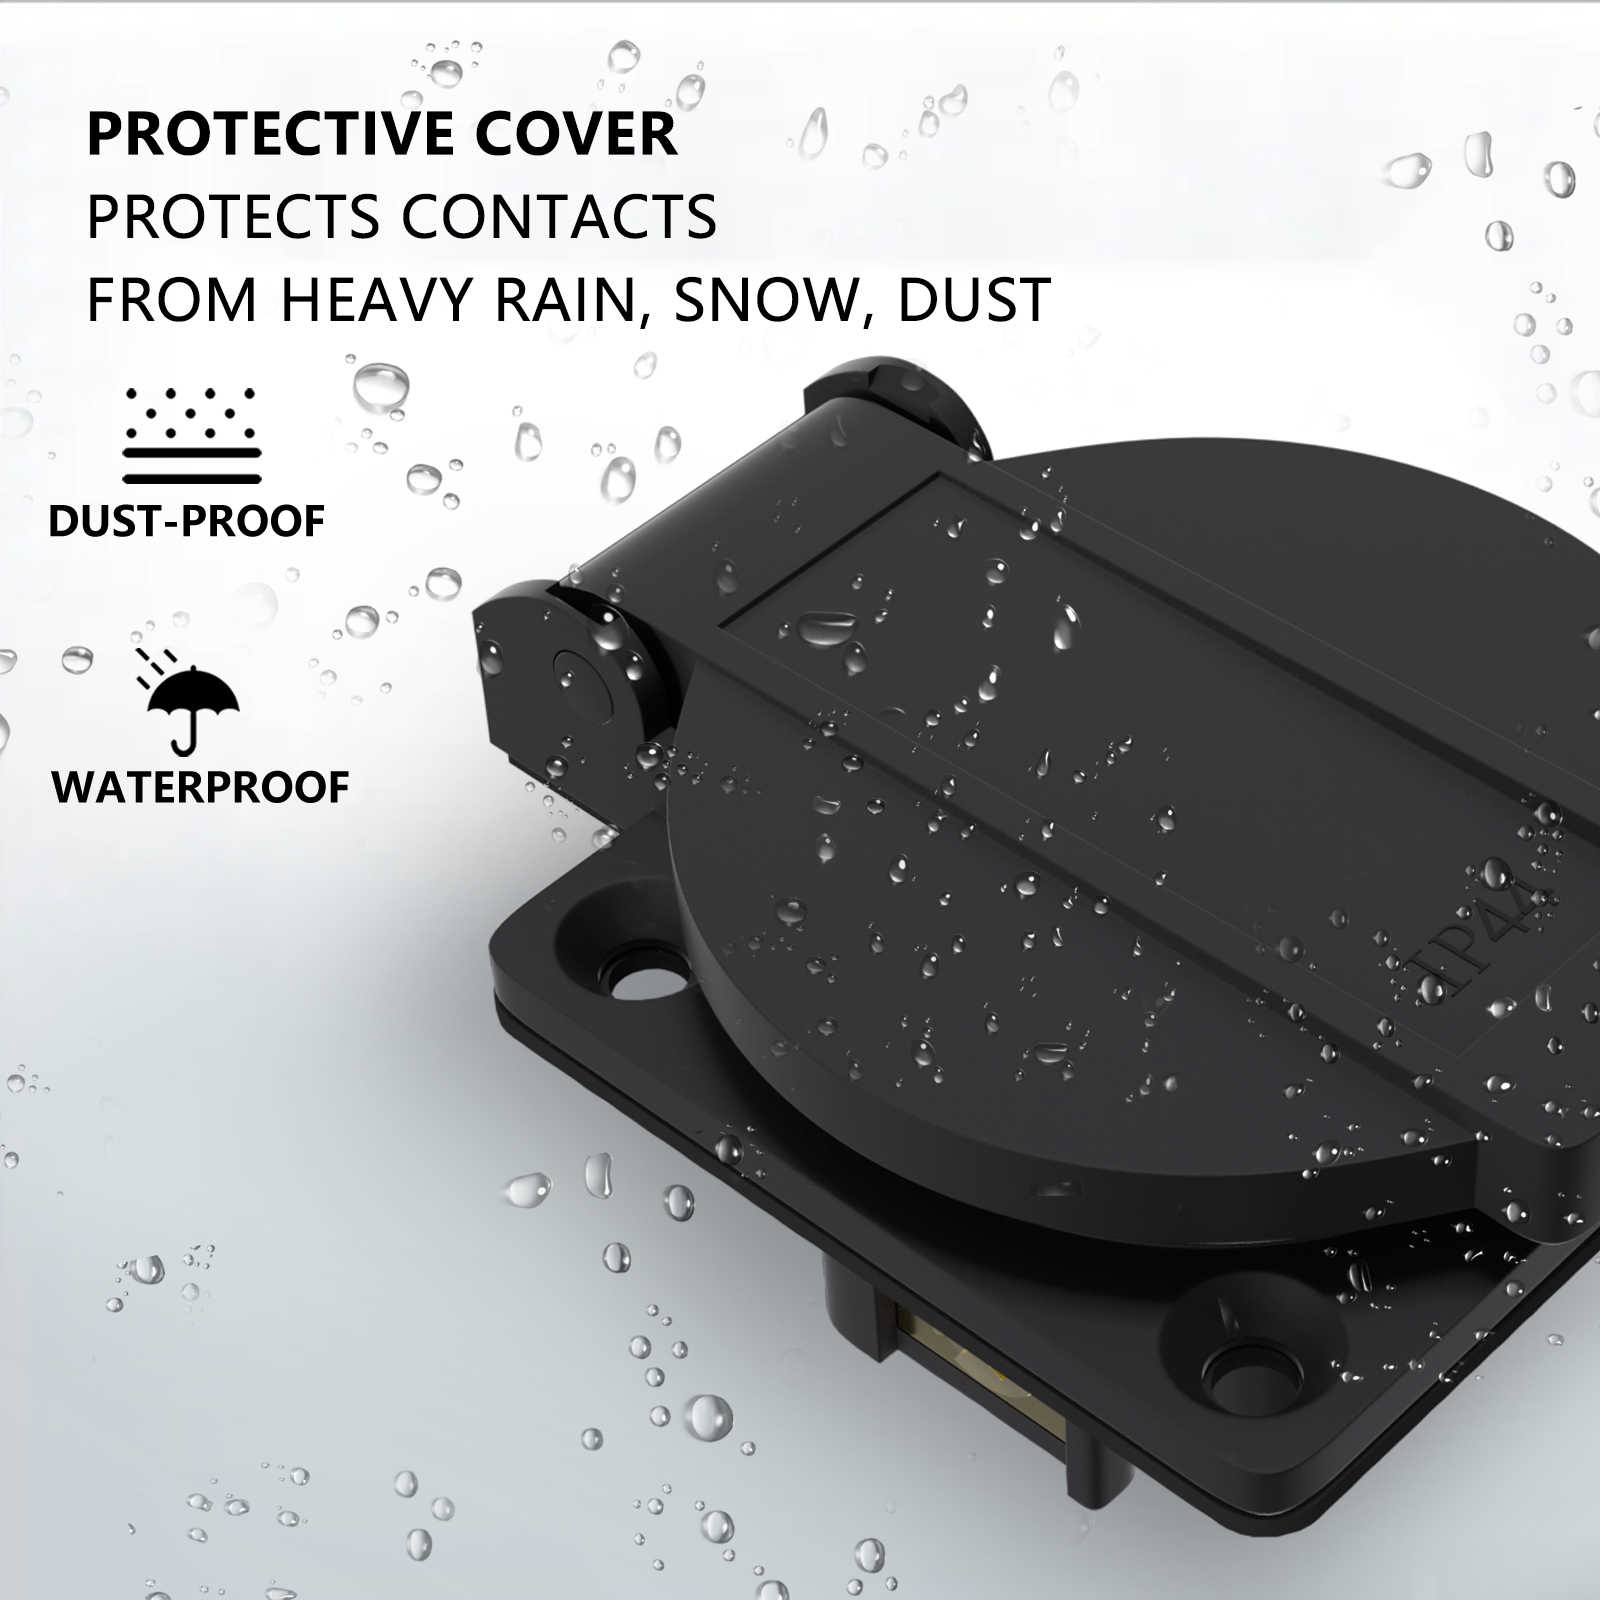 The cover can protect from water snow and dust